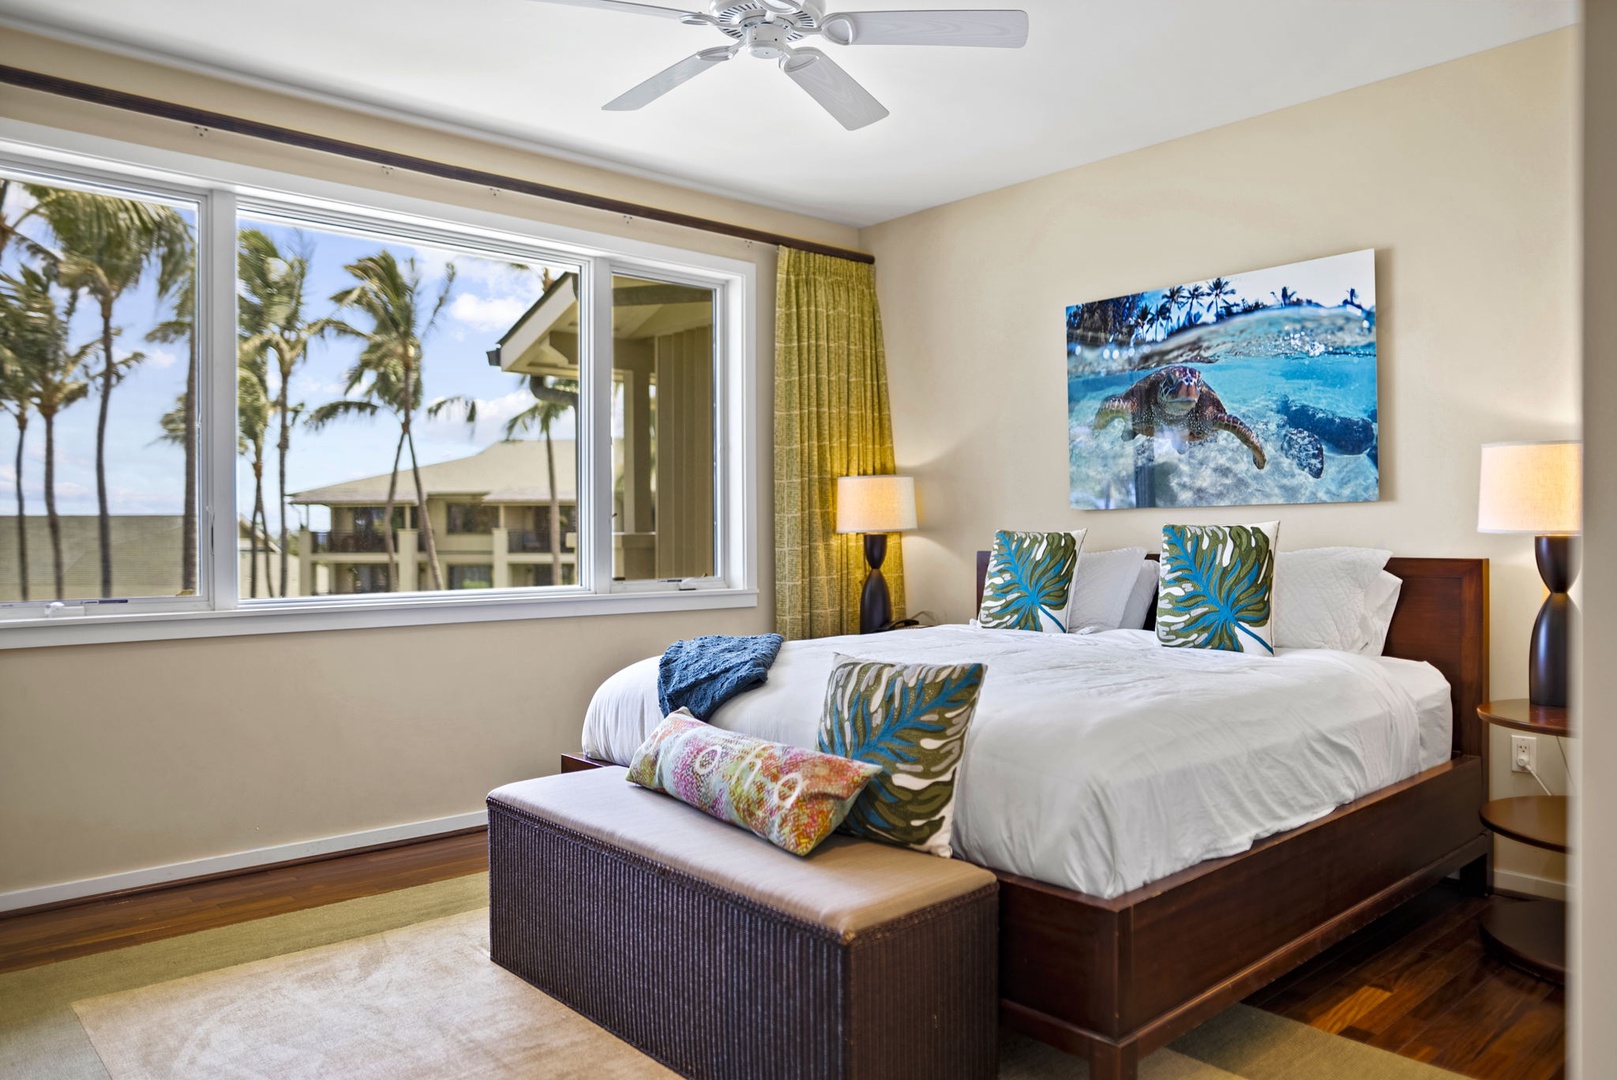 Kahuku Vacation Rentals, Turtle Bay Villas 307 - Main bedroom with king sized bed